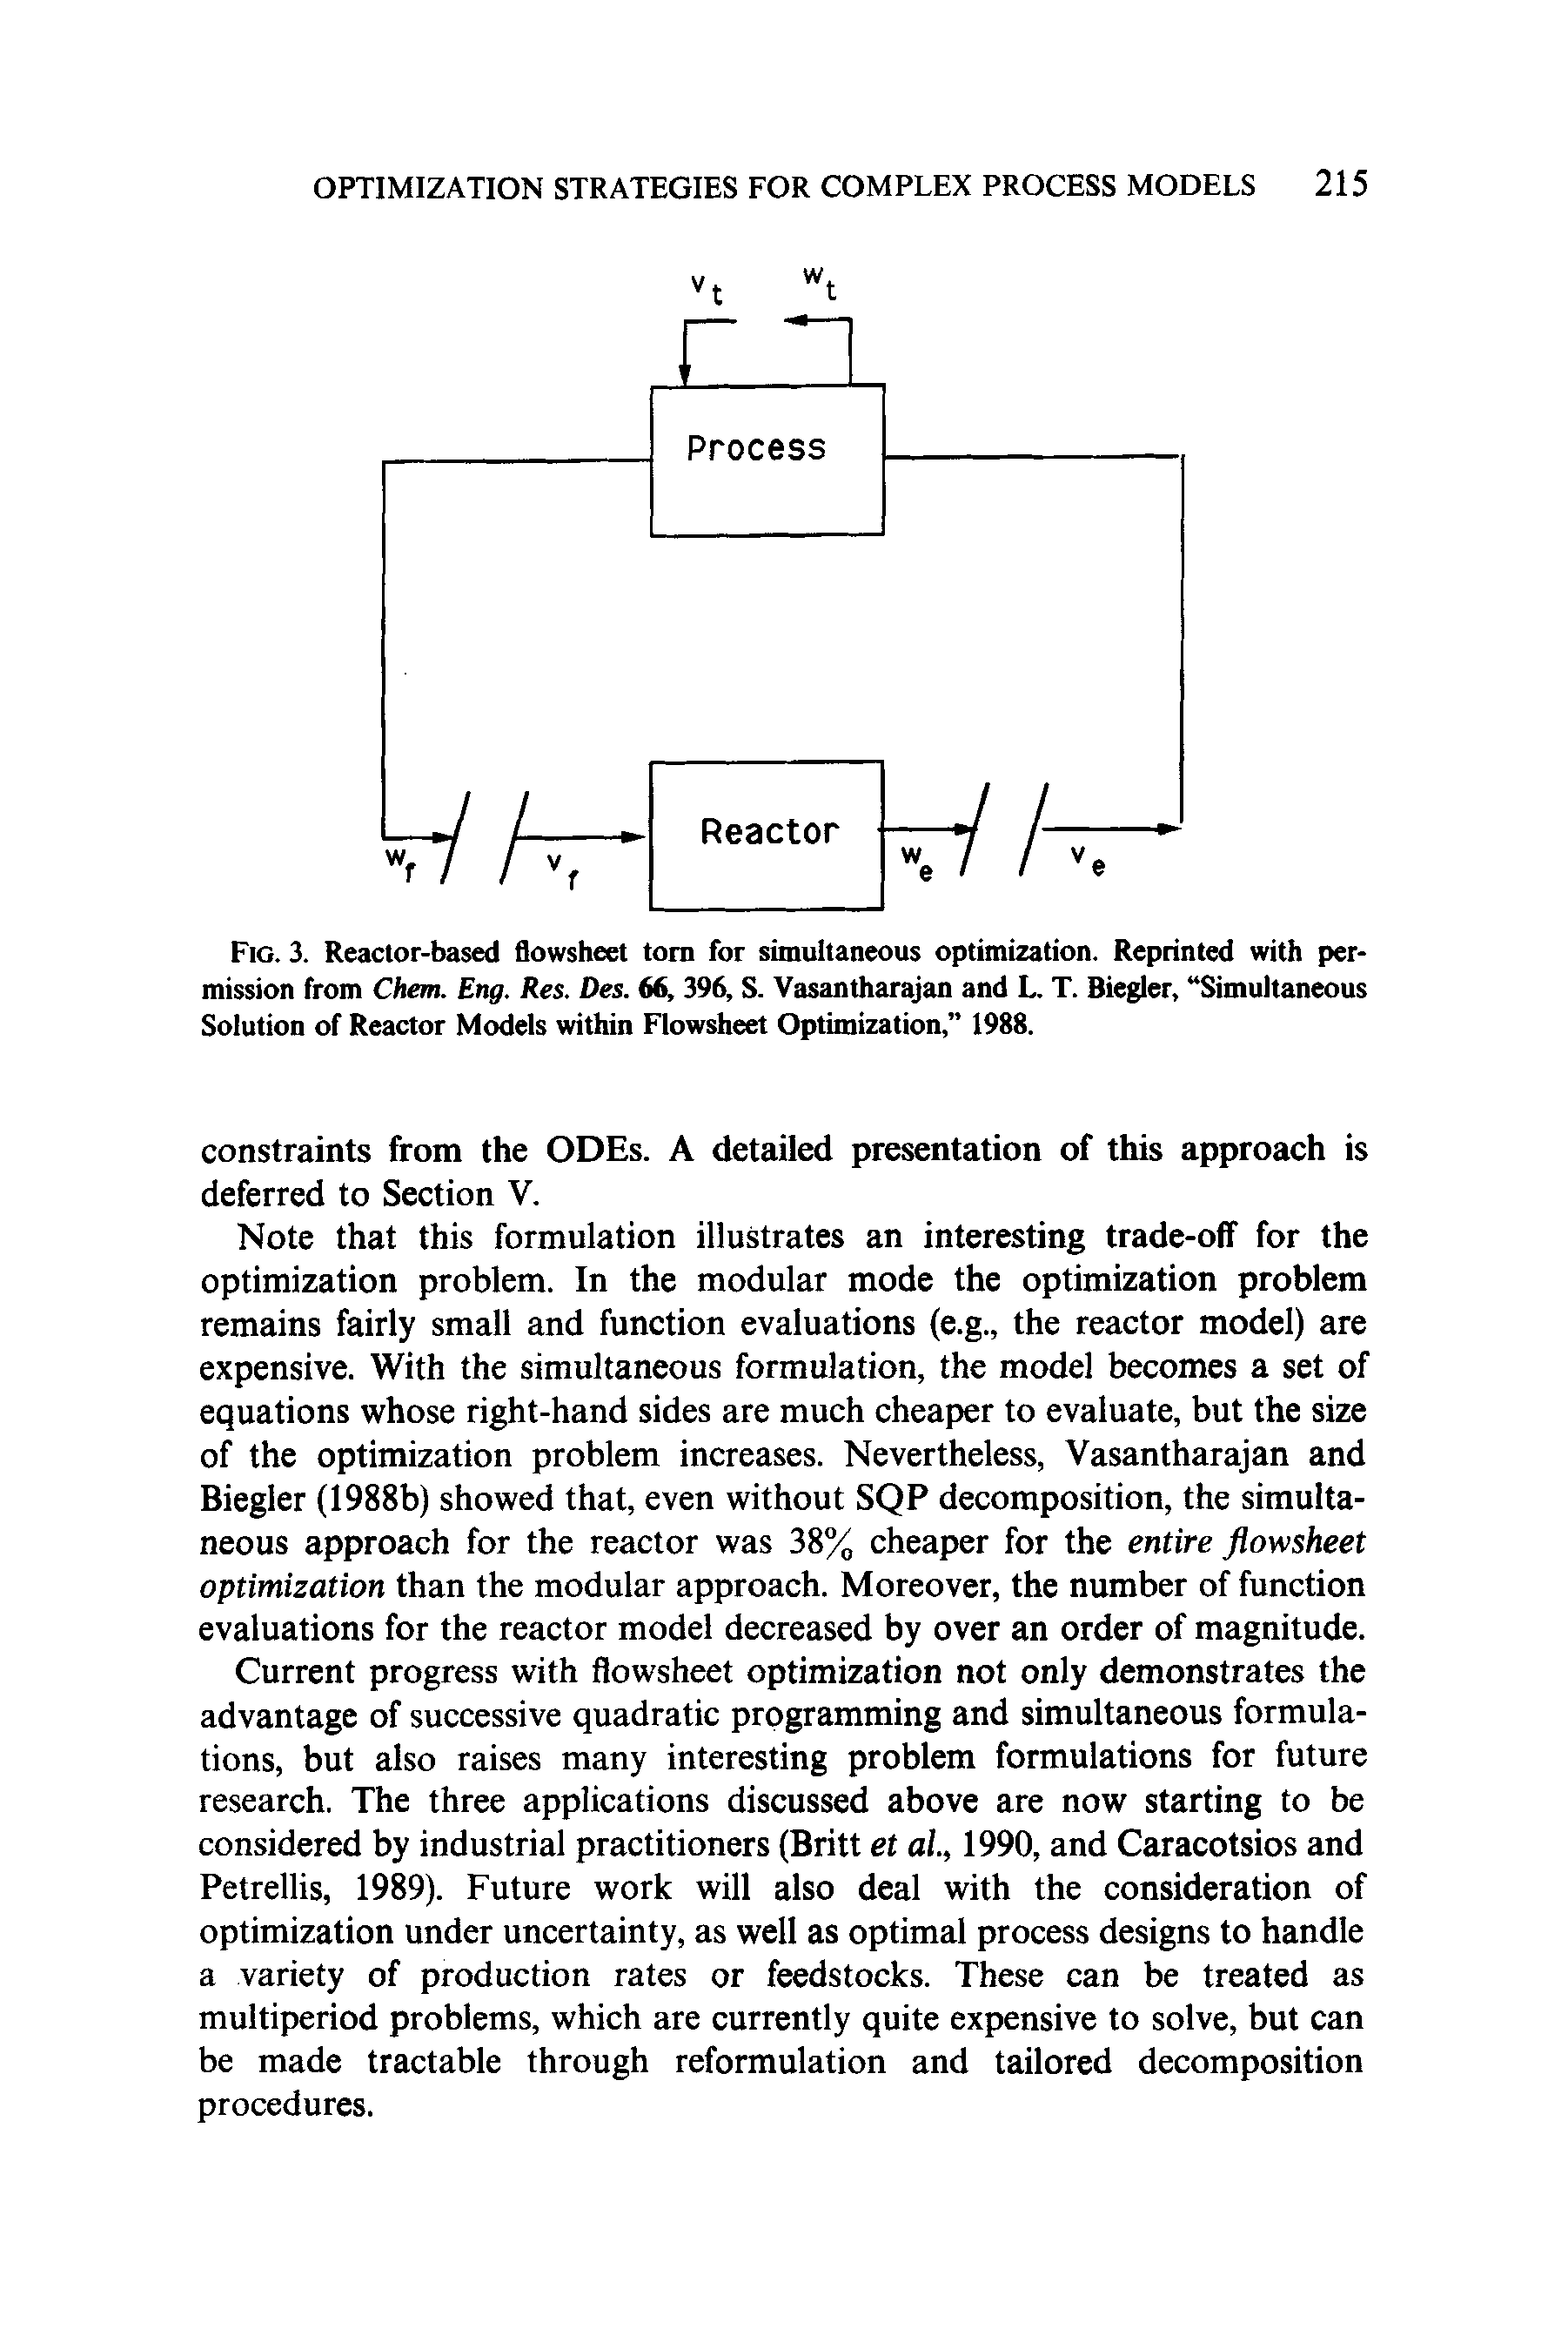 Fig. 3. Reactor-based flowsheet tom for simultaneous optimization. Reprinted with permission from Chem. Eng. Res. Des. 66, 396, S. Vasantharajan and L. T. Biegler, Simultaneous Solution of Reactor Models within Flowsheet Optimization, 1988.